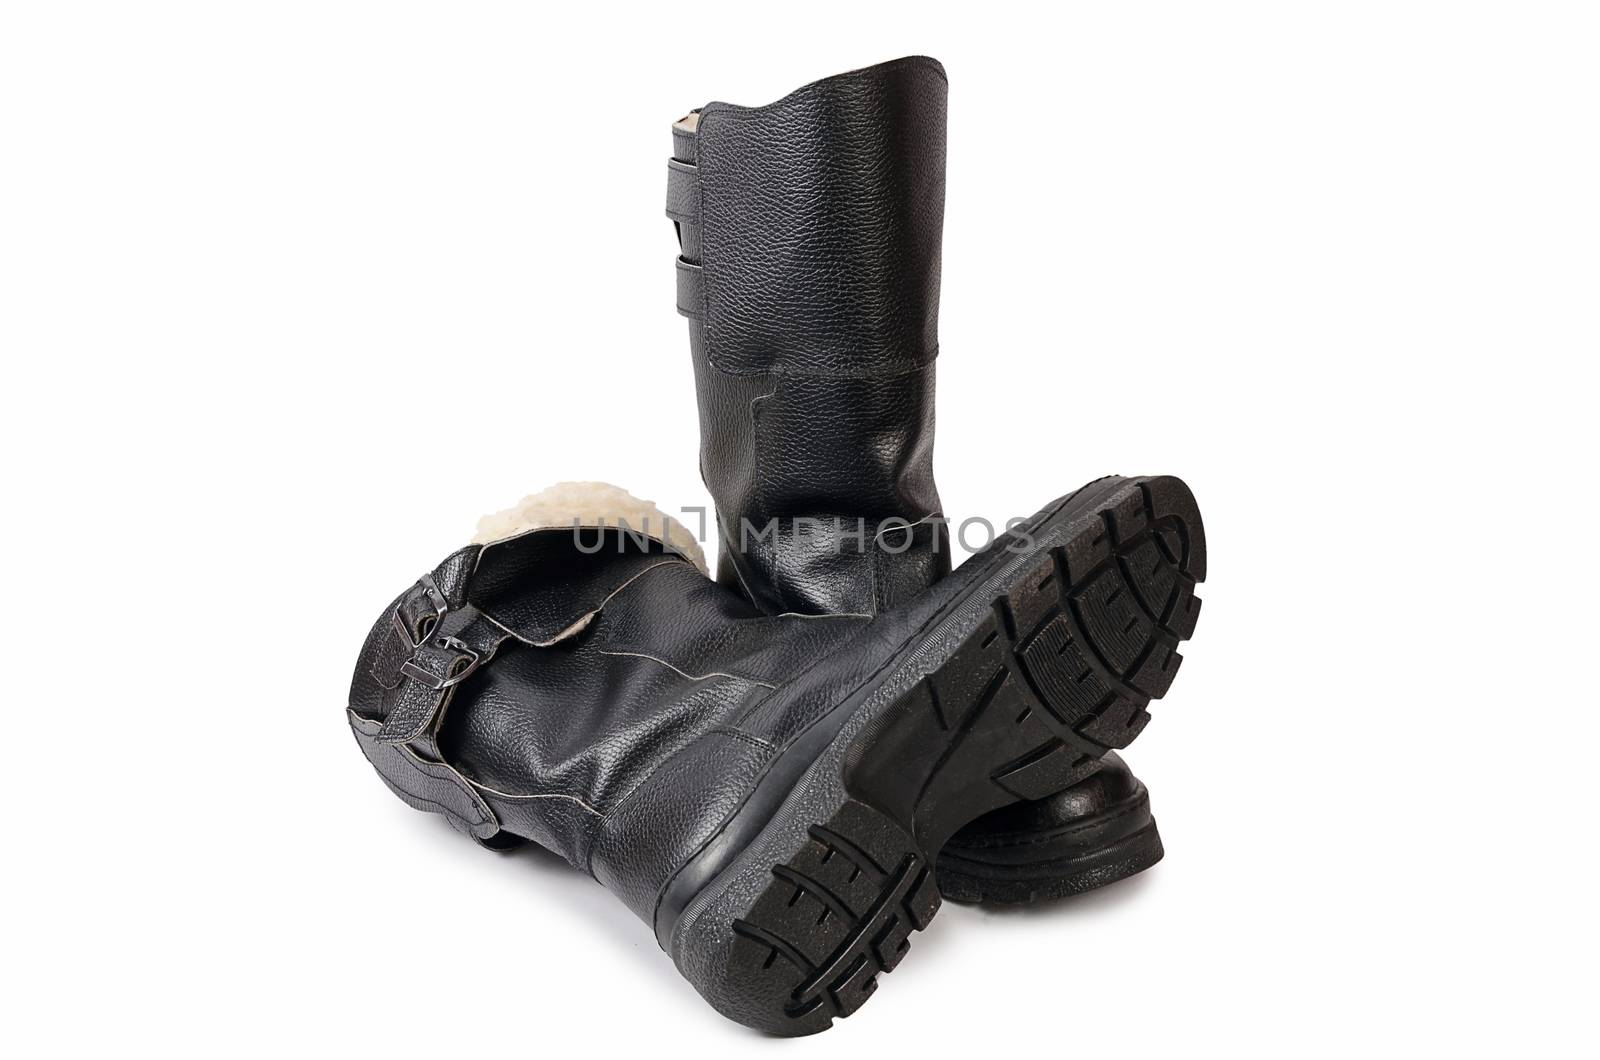 Mens black boots isolated on white background